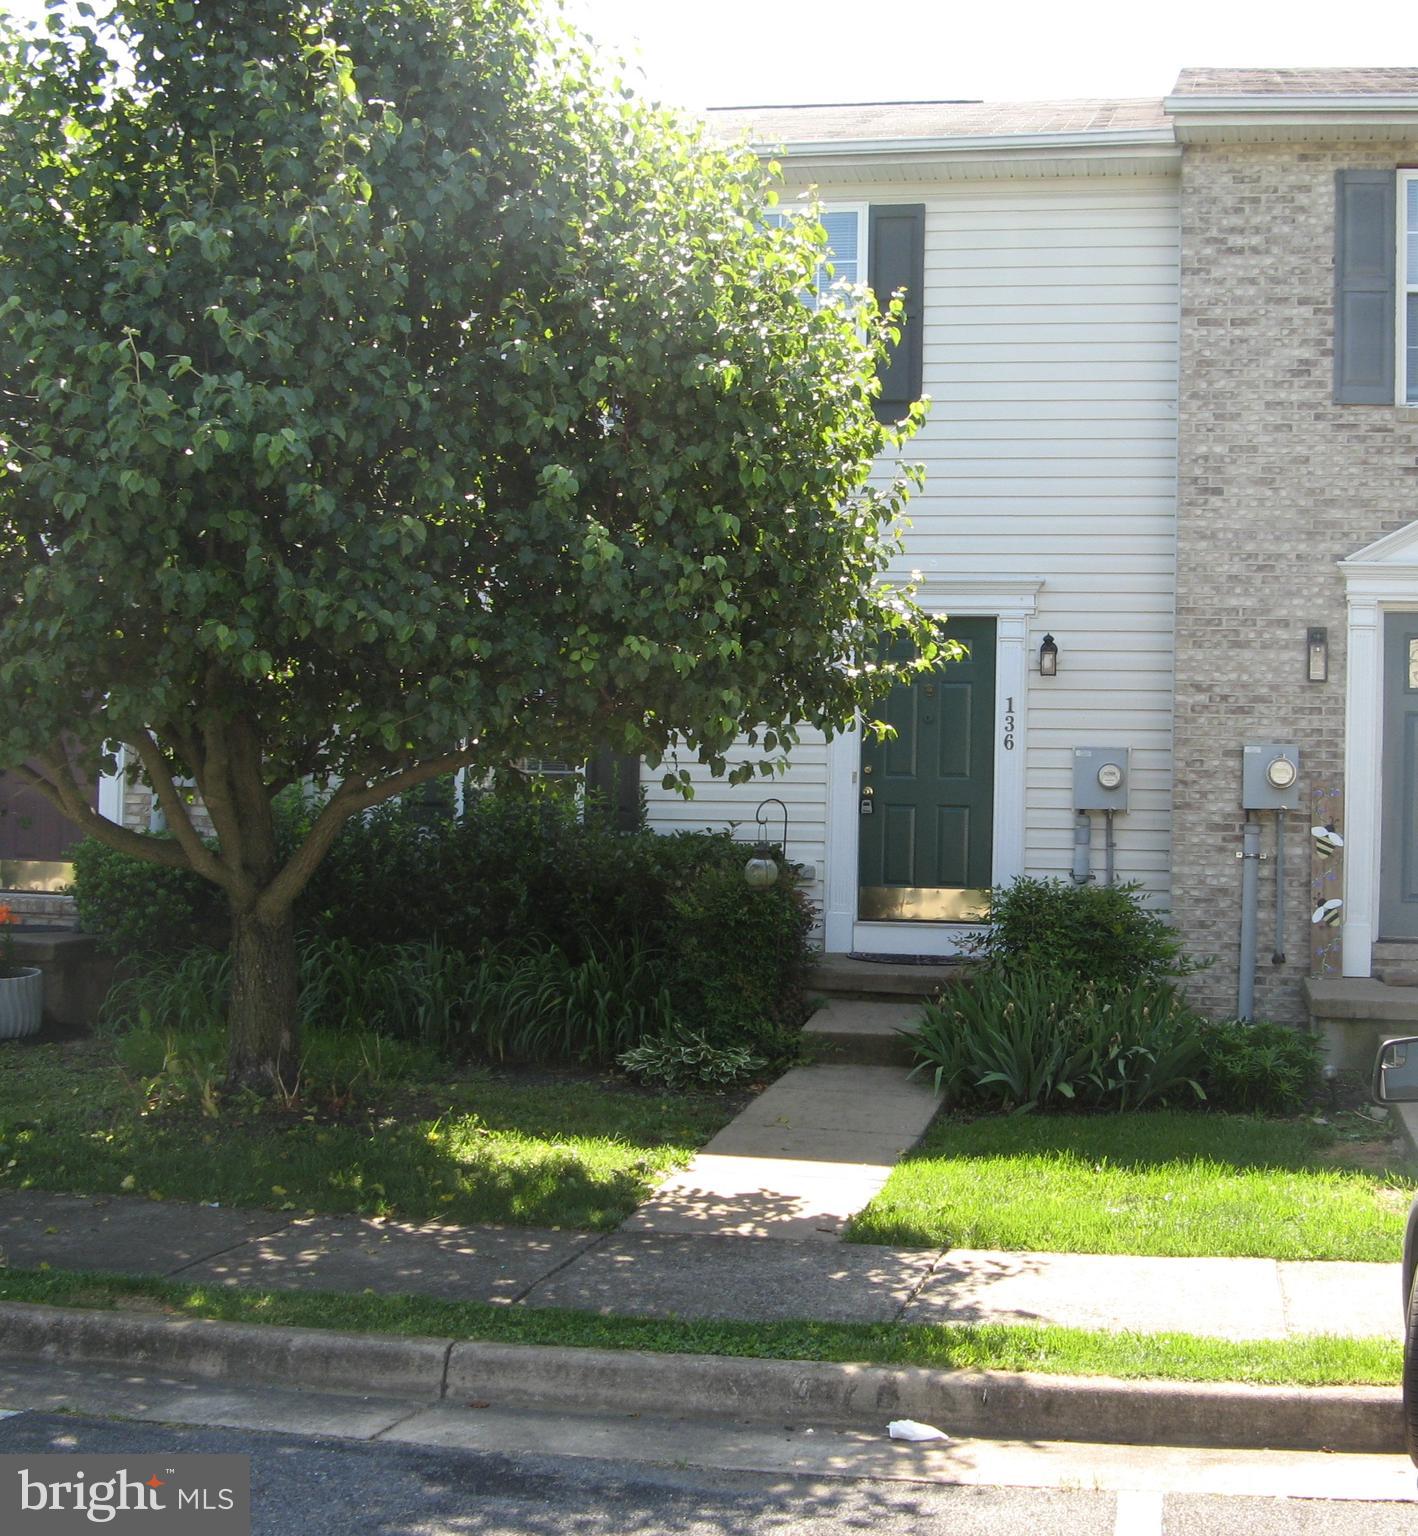 a view of a yard in front of a house with plants and large tree